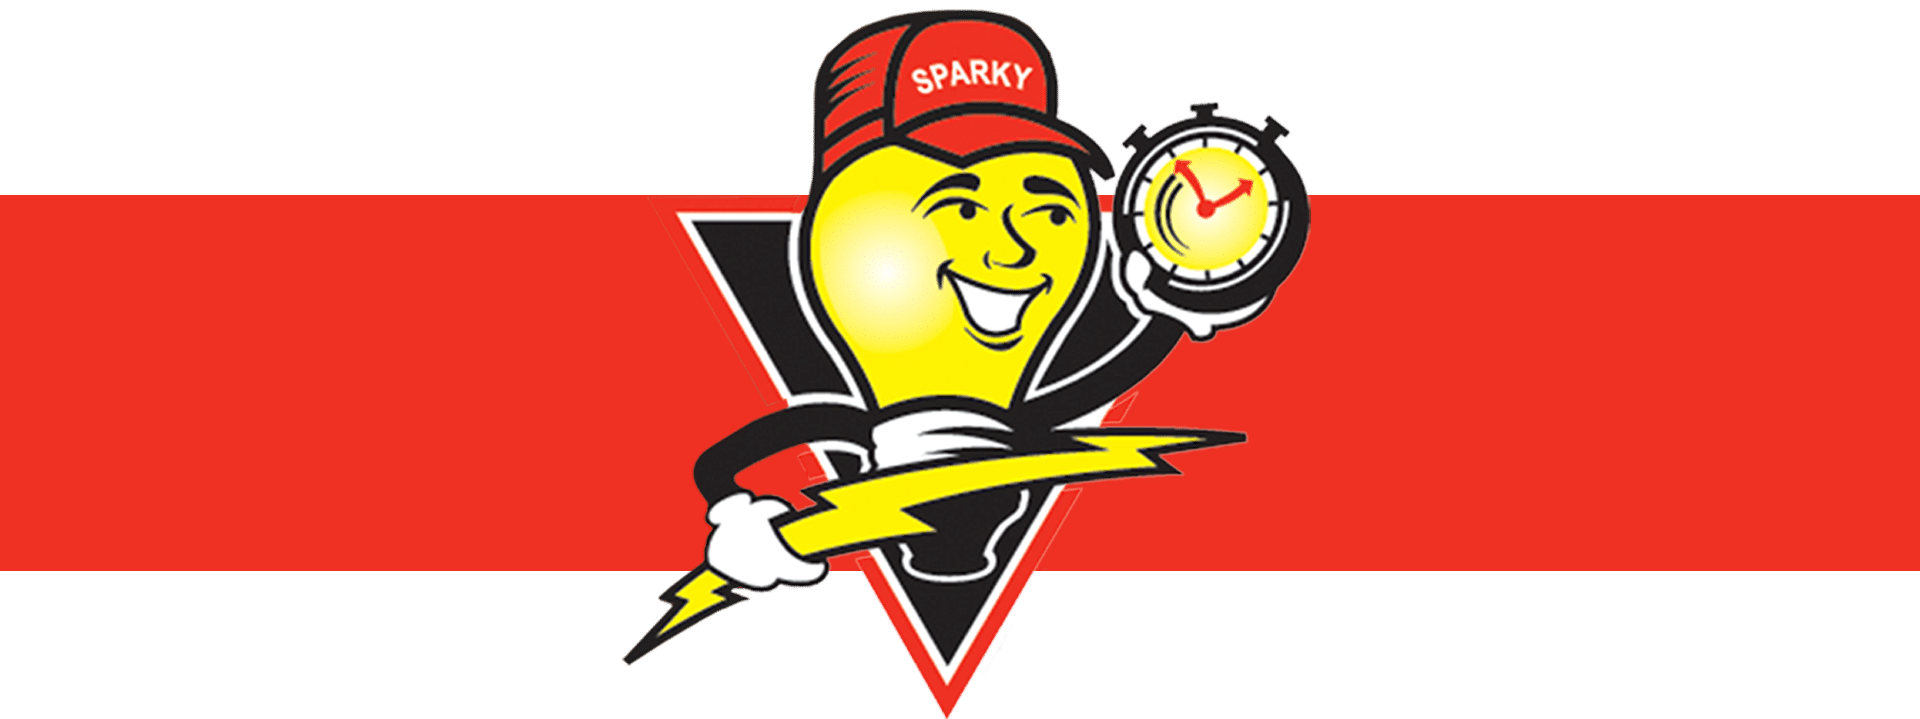 Mister Sparky of Northern Delaware is ready to serve all your electrical needs